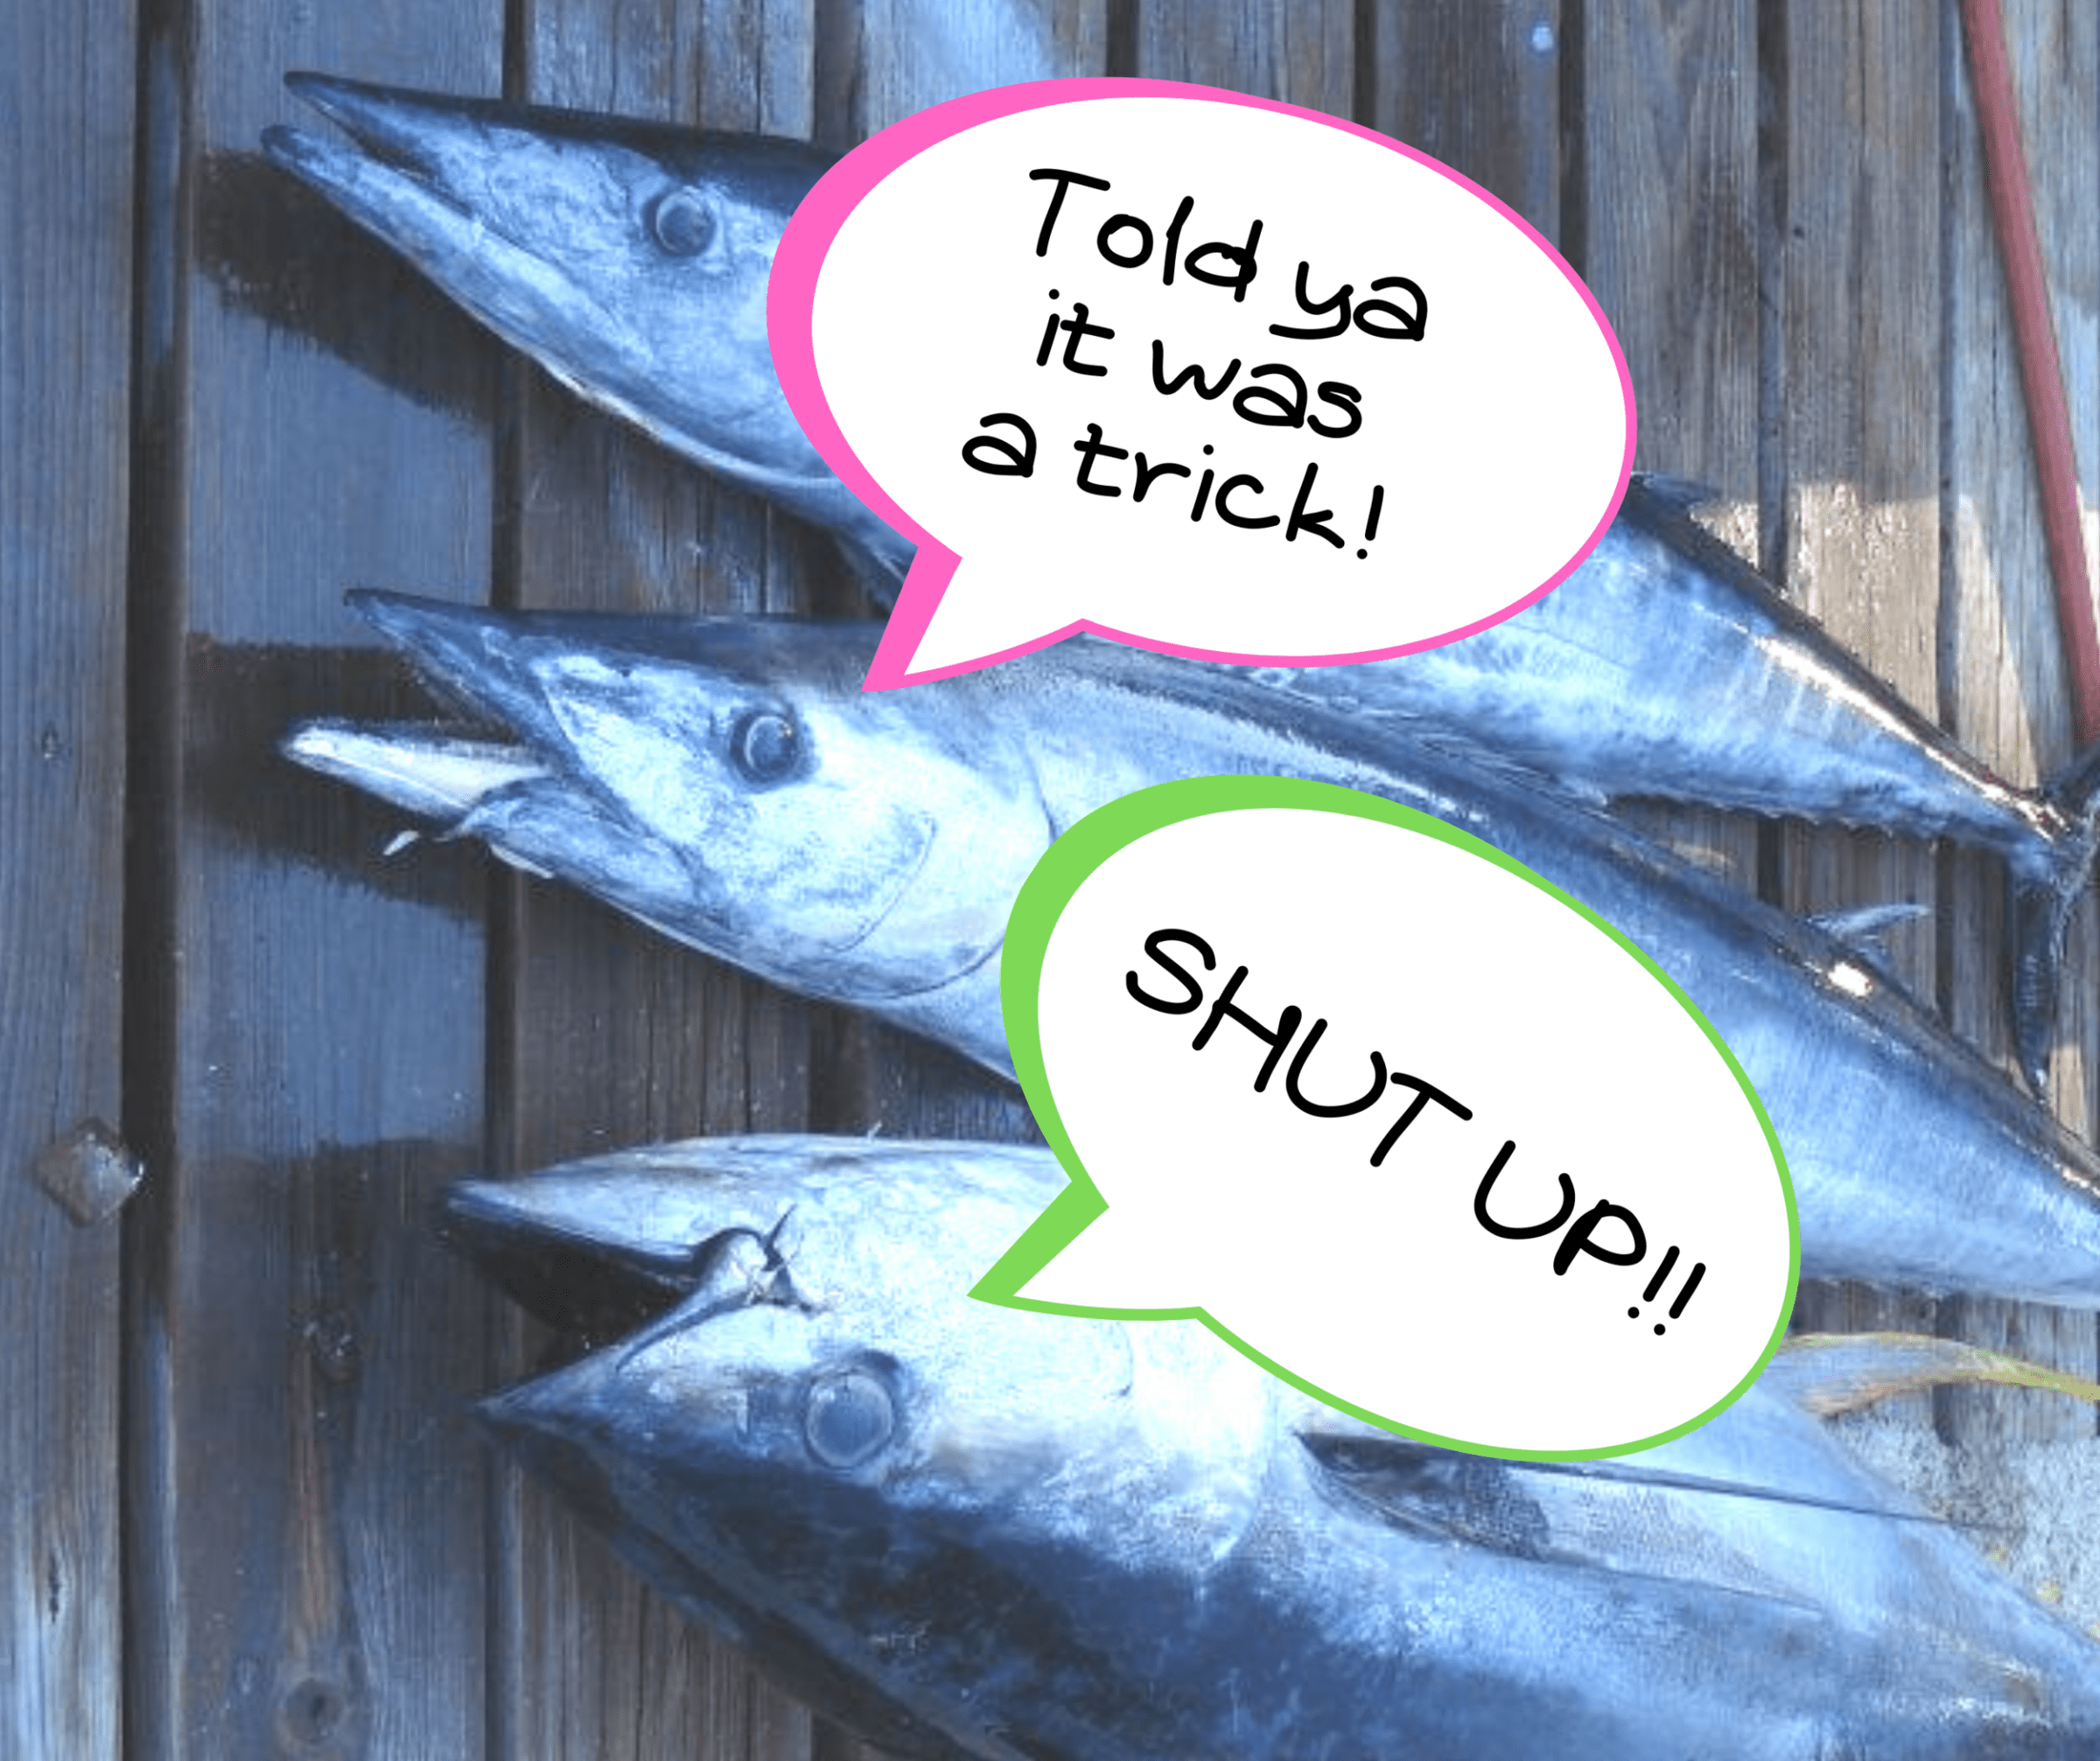 Dead fish saying "Told ya it was a trick!" and "Shut up!"